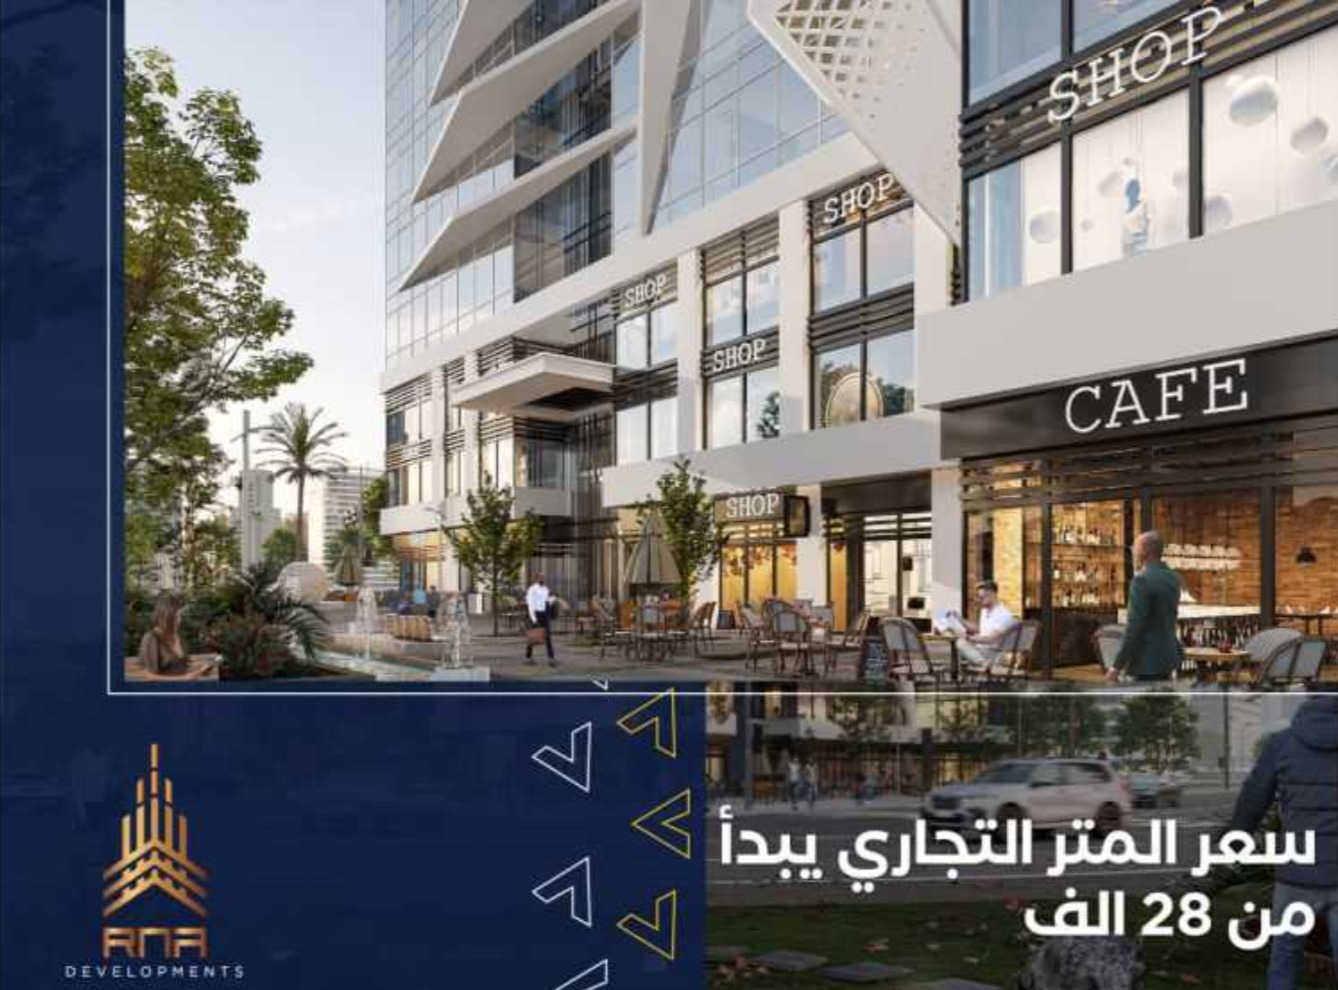 Commercial units with an area of 70 meters for reservation in Elevado Mall Administrative Capital